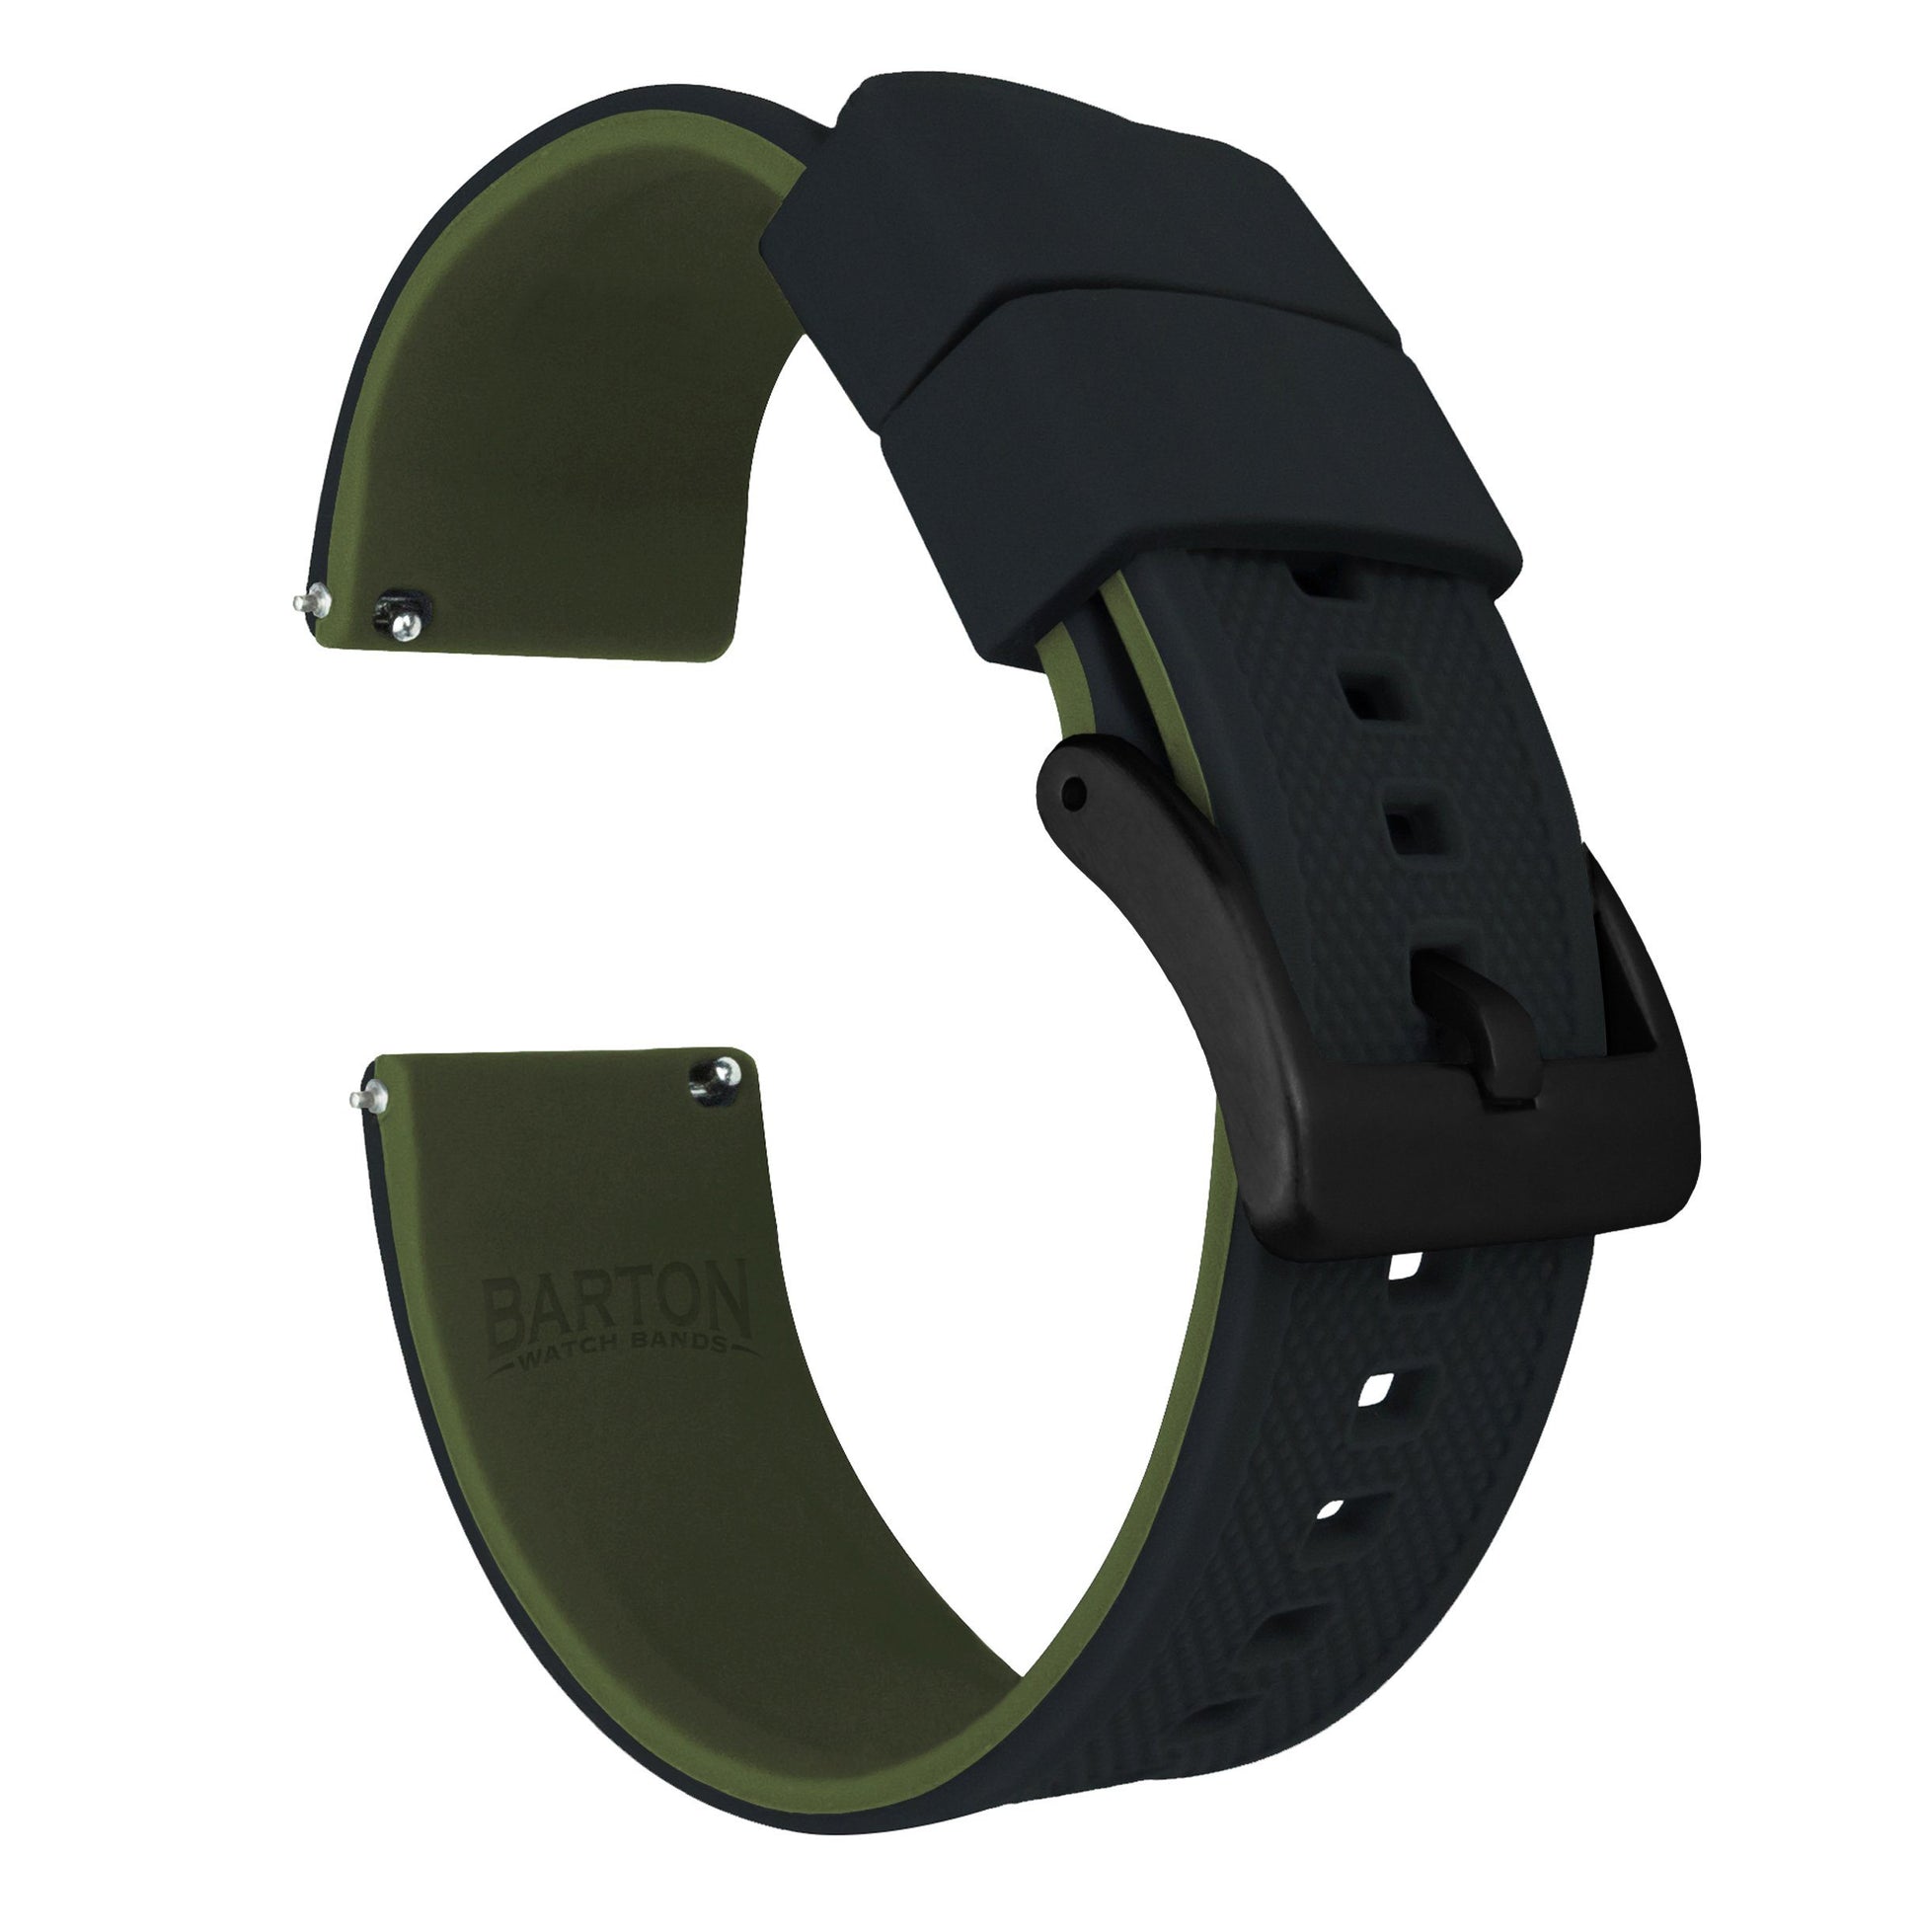 Fossil Gen 5 | Elite Silicone | Black Top / Army Green Bottom - Barton Watch Bands